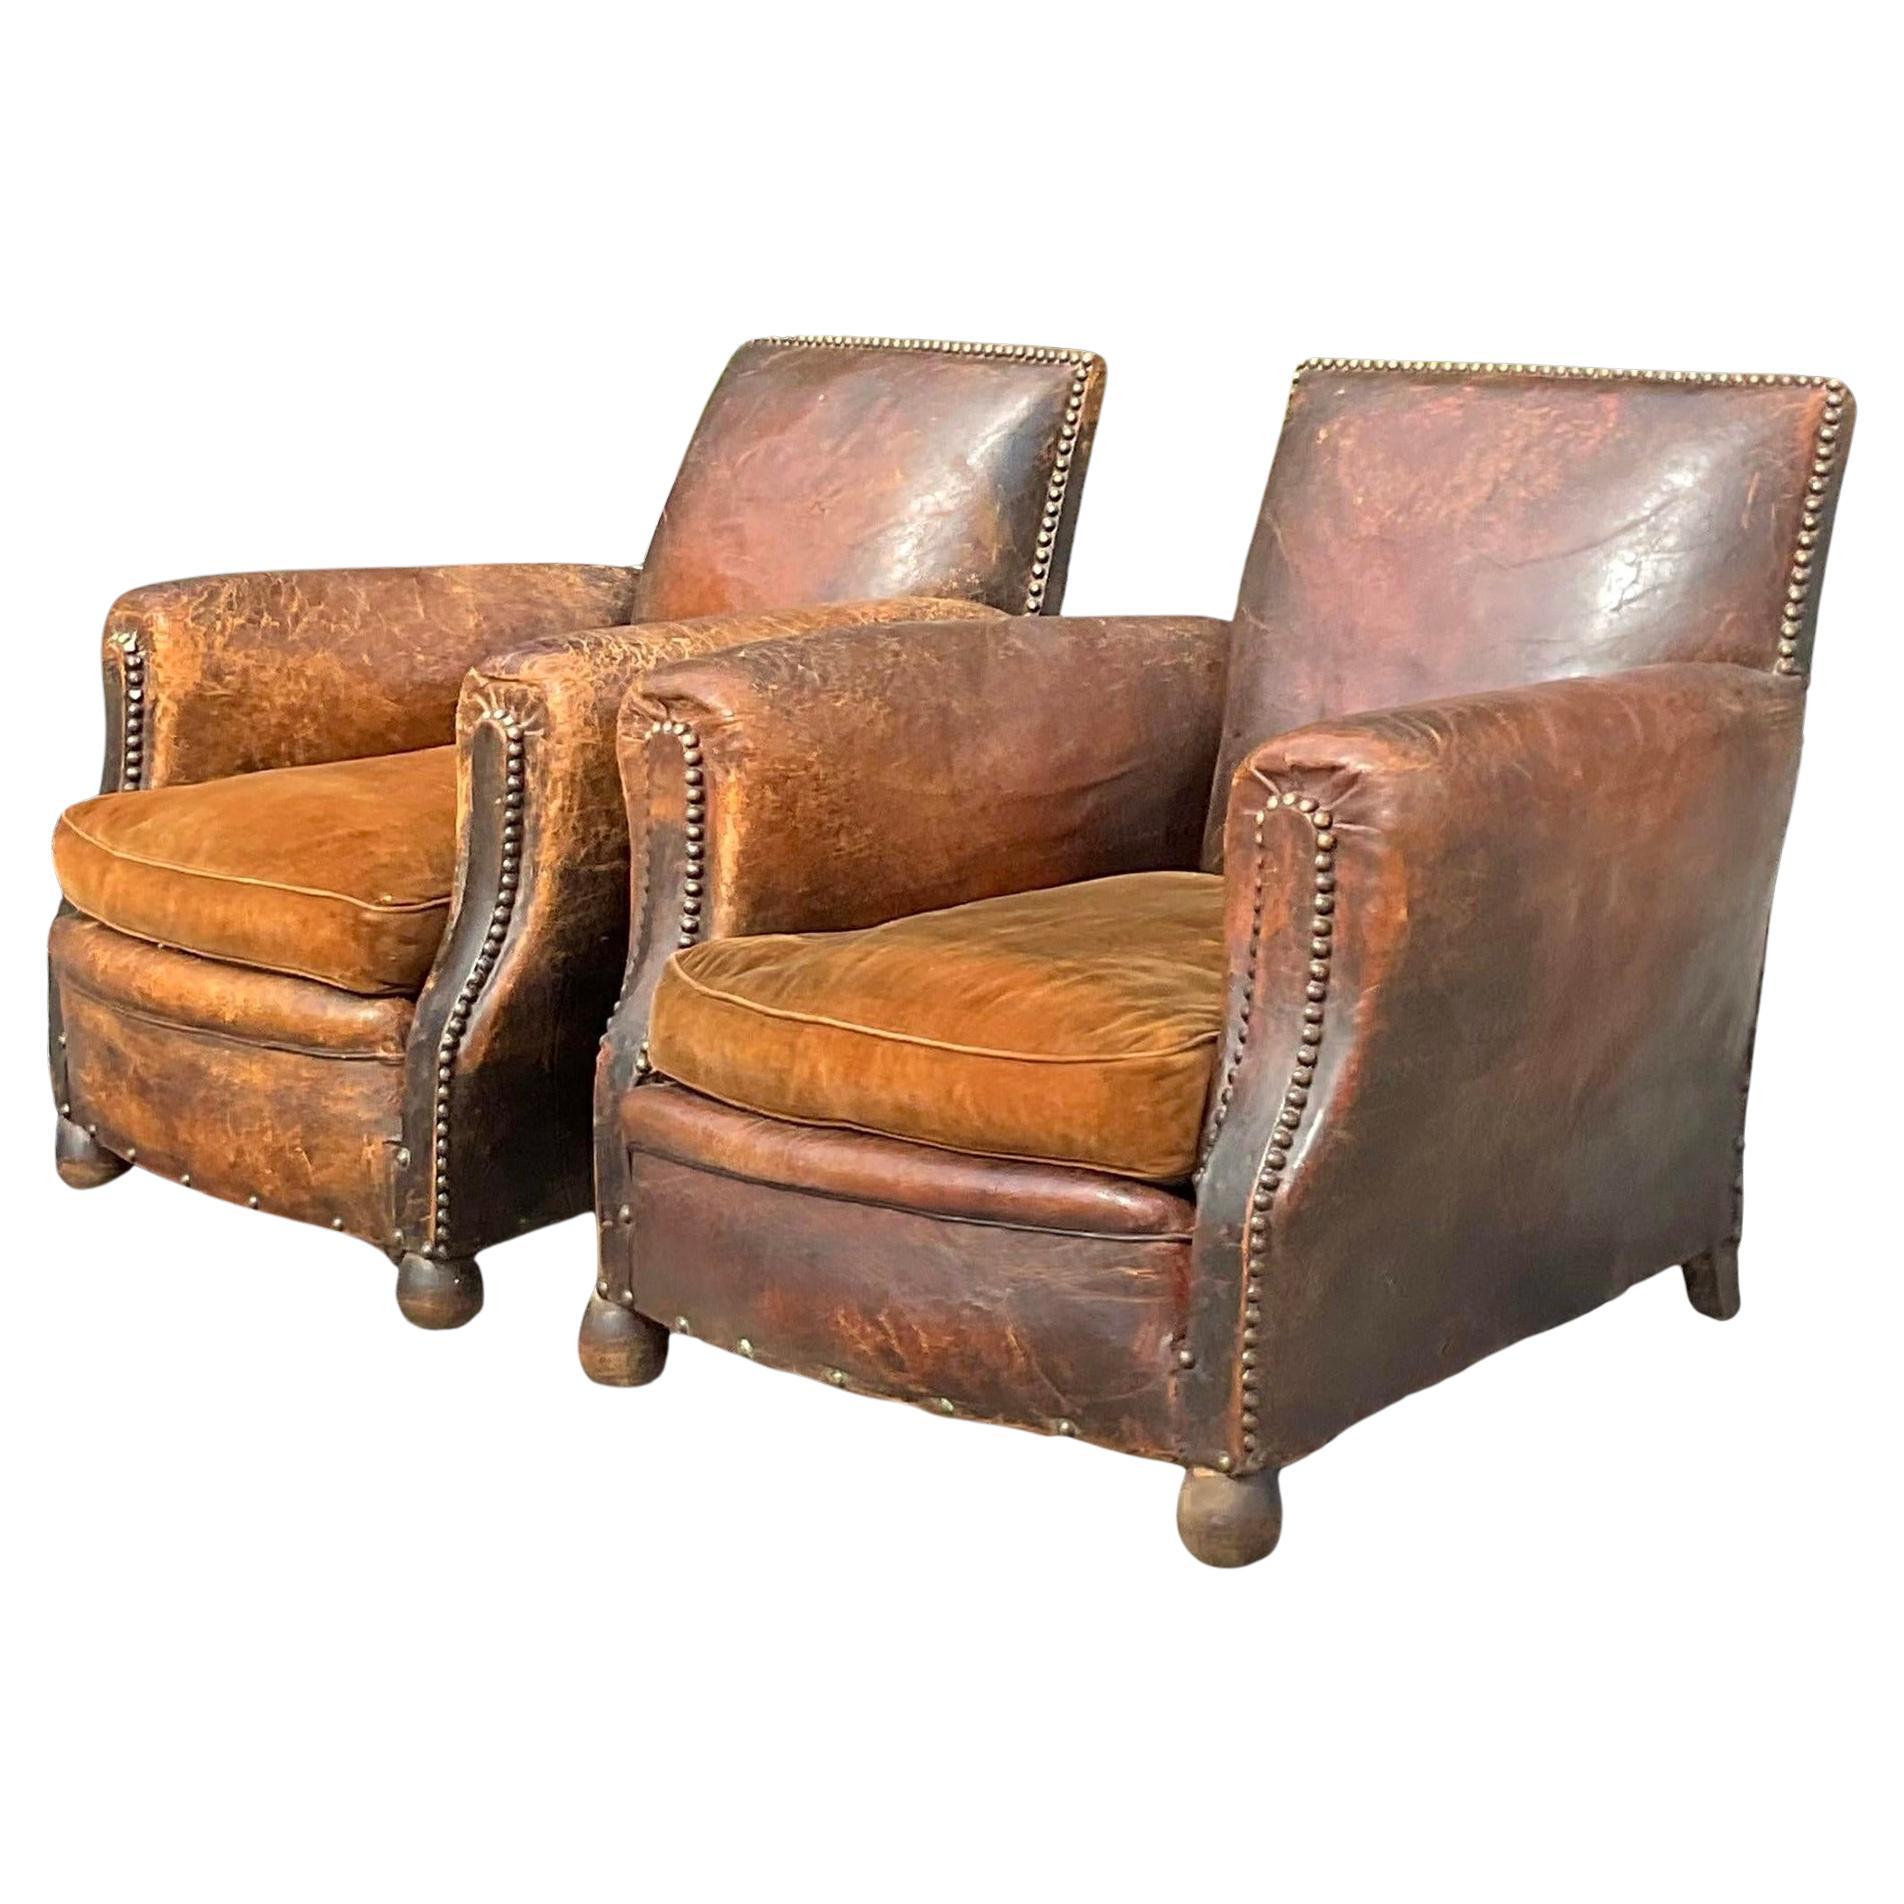 Vintage Boho Distressed French Art Deco Leather Club Chairs - a Pair For Sale